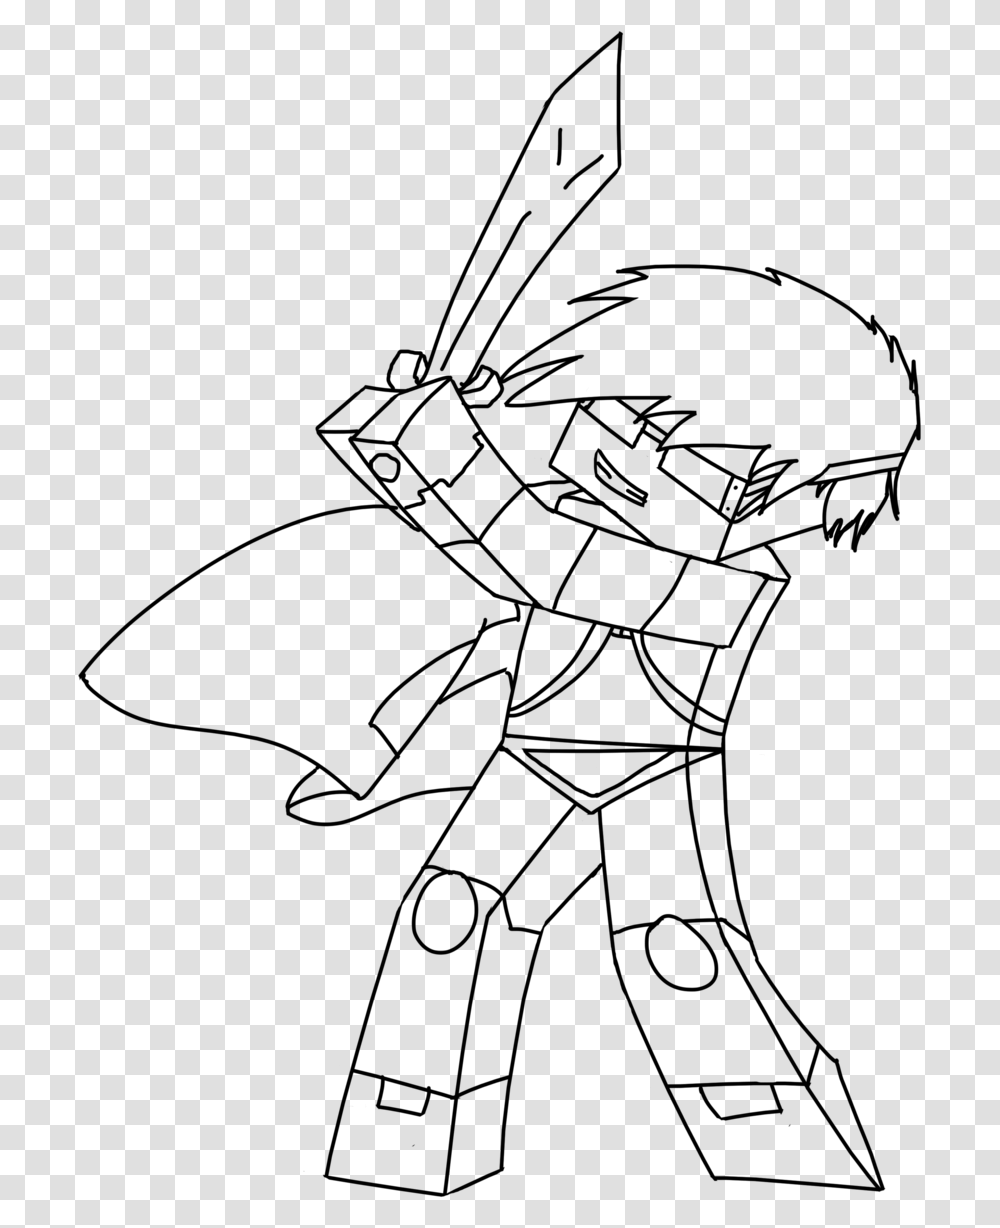 Pics Of Minecraft Skins Coloring Pages Minecraft Skin Coloring Pages, Gray, World Of Warcraft Transparent Png